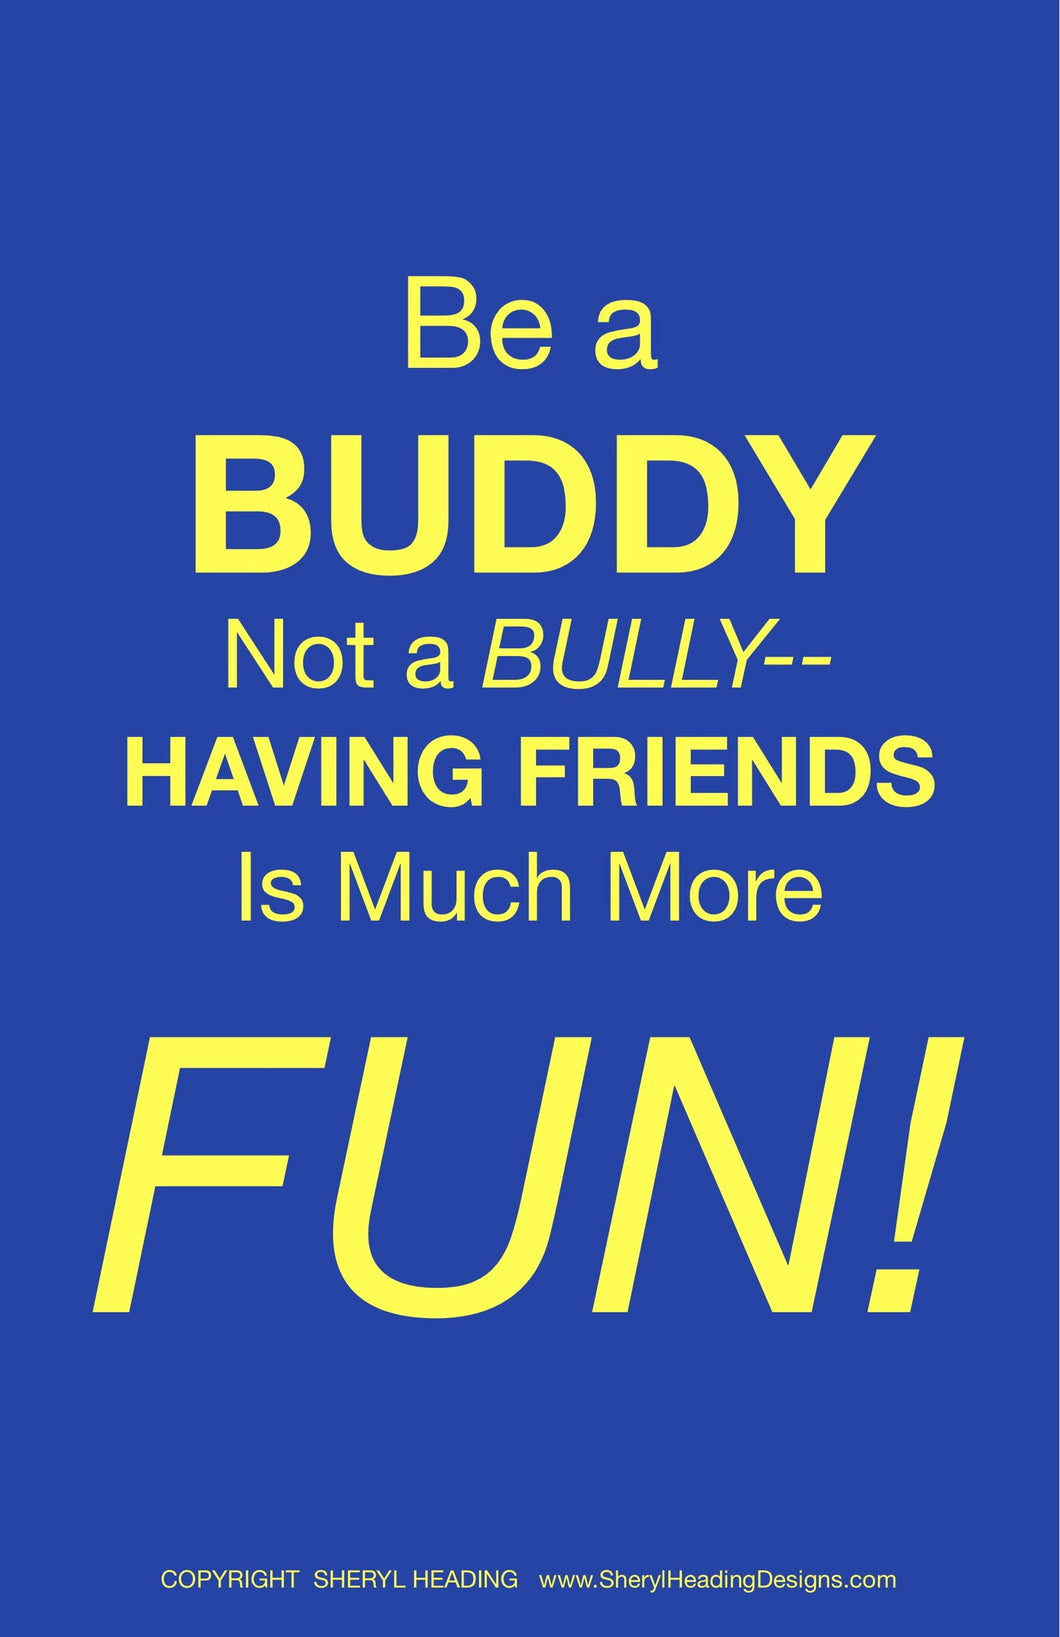 BE A BUDDY NOT A BULLY Poster - Sheryl Heading Designs